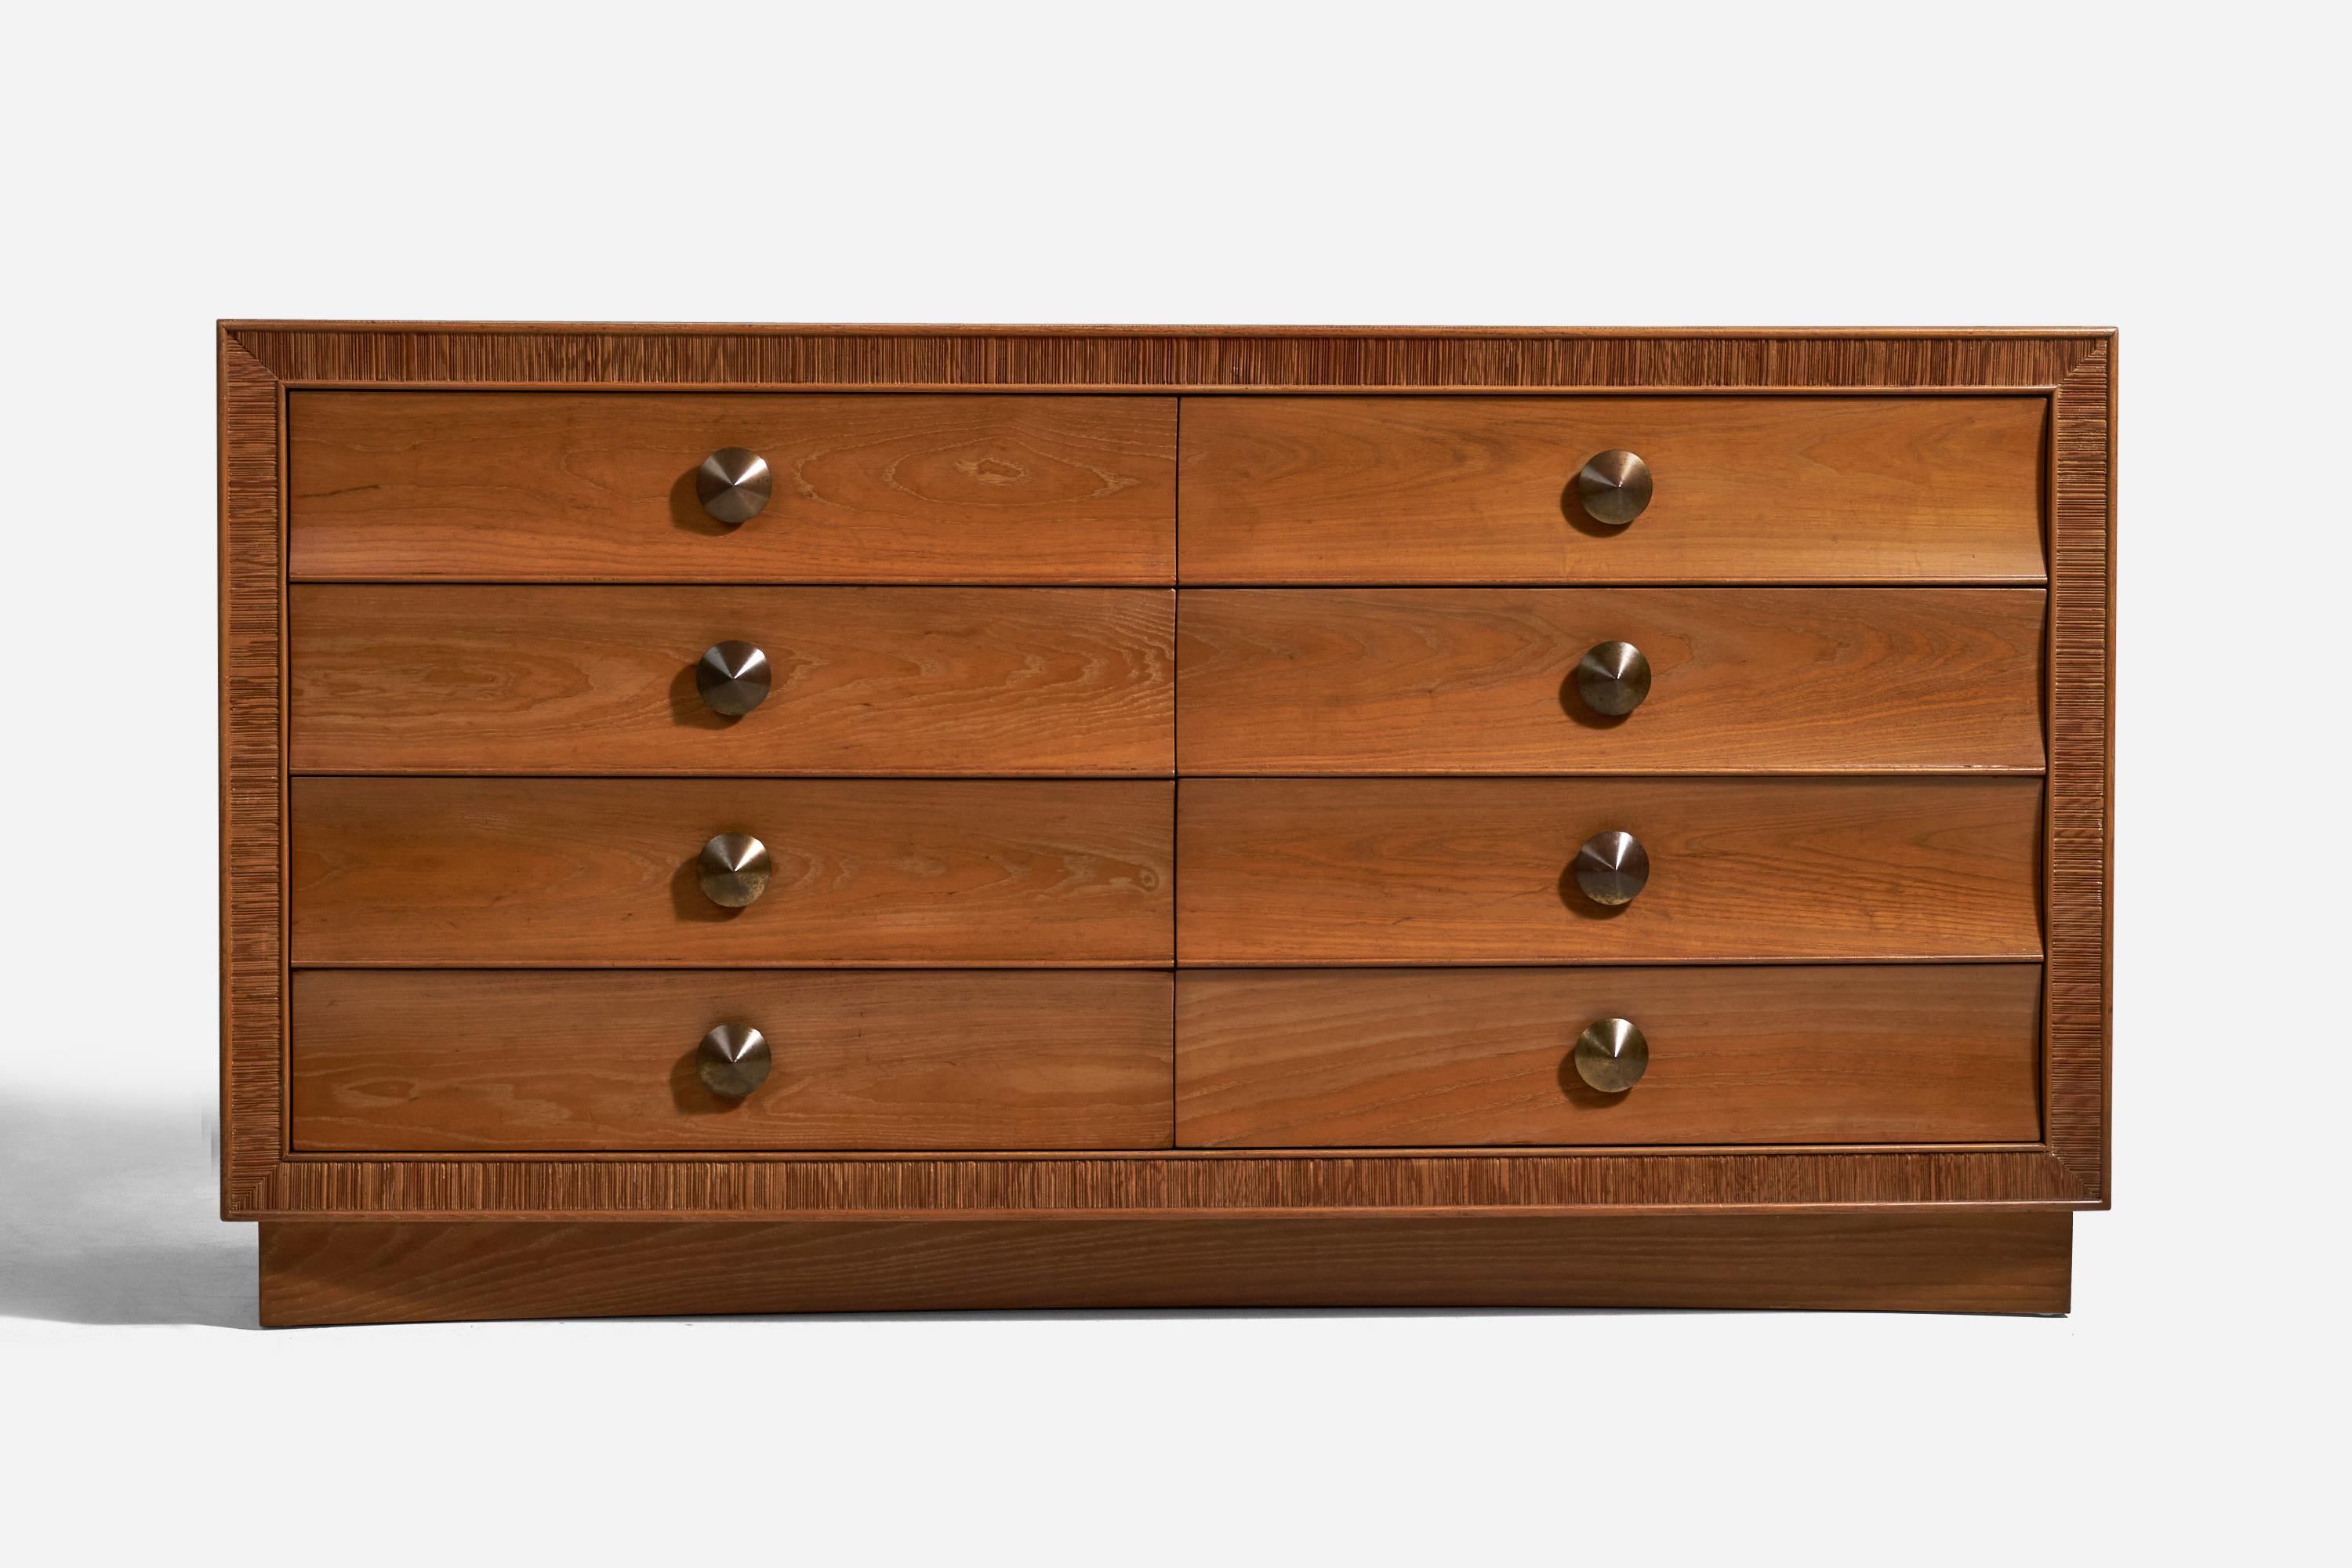 An oak and brass dresser designed by Paul Frankl and produced by Brown Saltman, USA, 1950s.